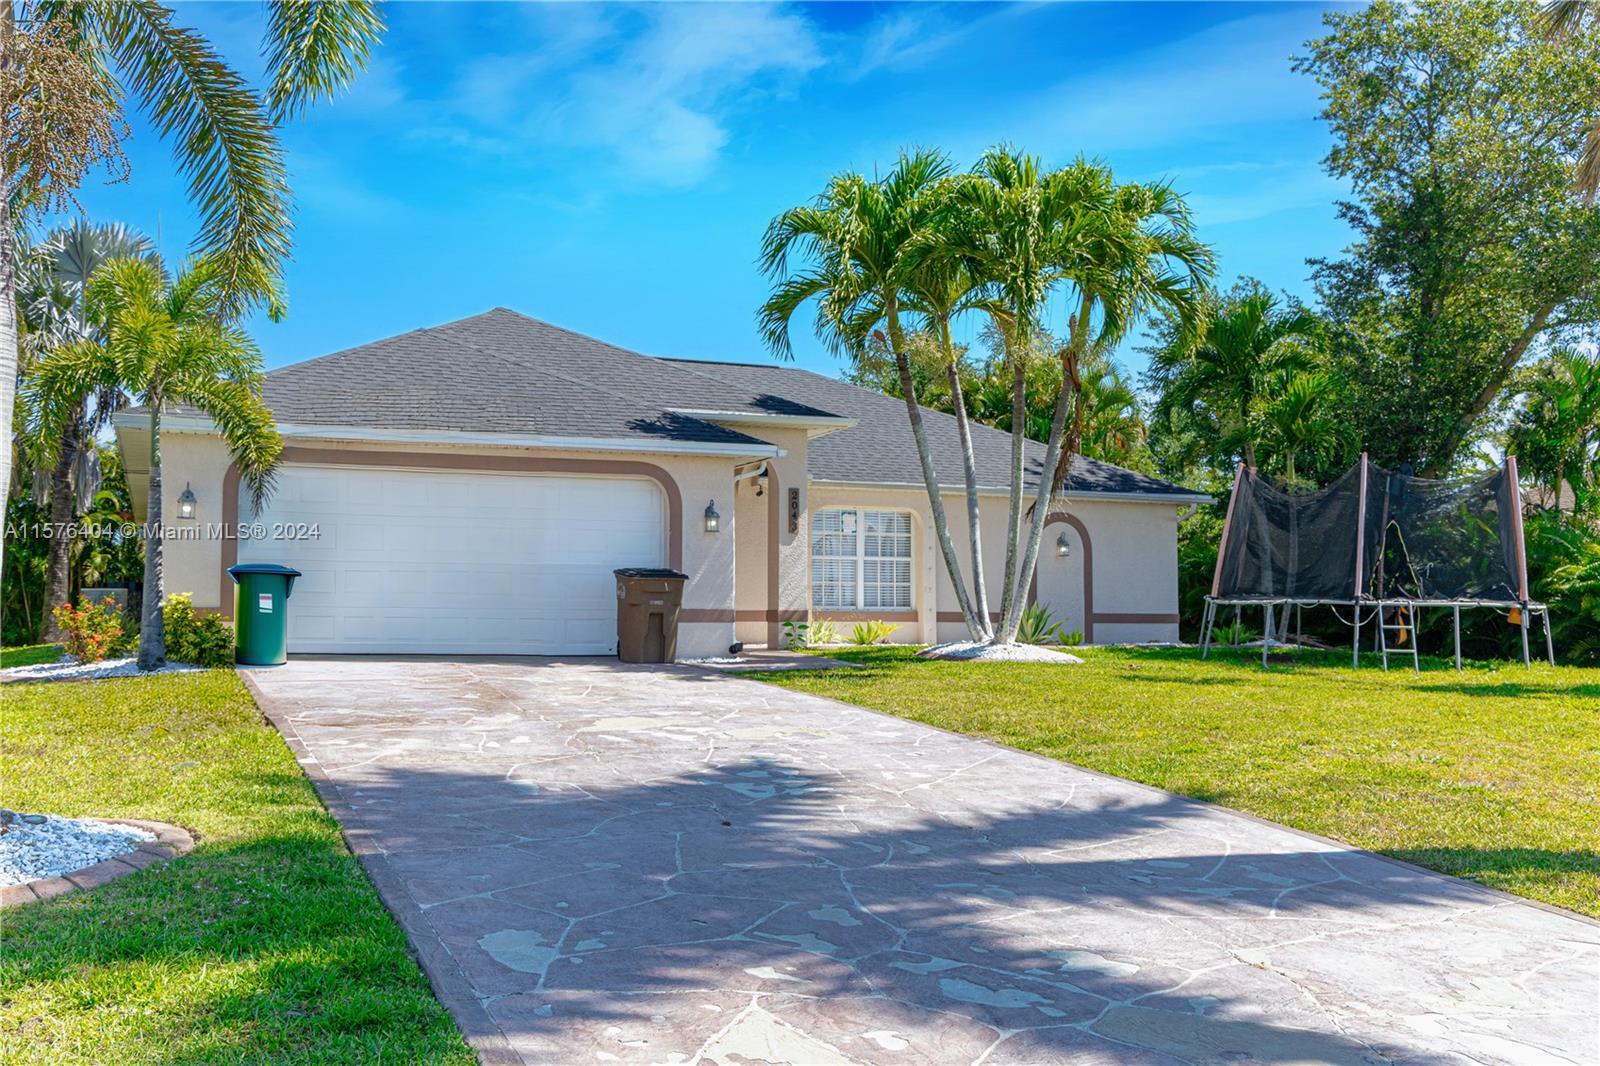 Photo of 2043 NW 6 Ter in Cape Coral, FL